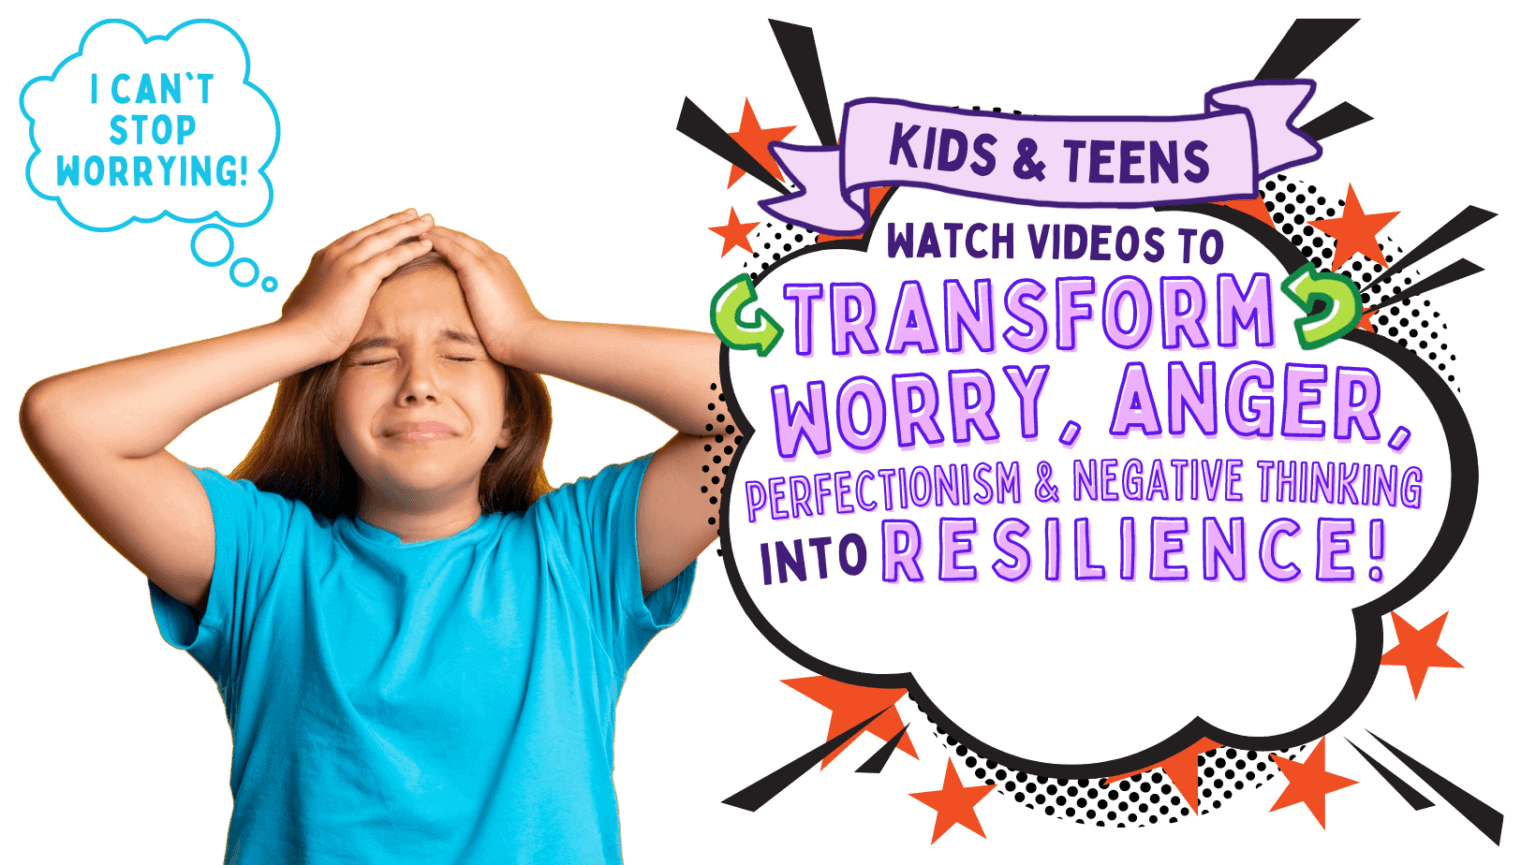 Kids & Teens Watch Videos to Tranform Worry, Anger, Perfectionism & Negative Thinking into Resilience